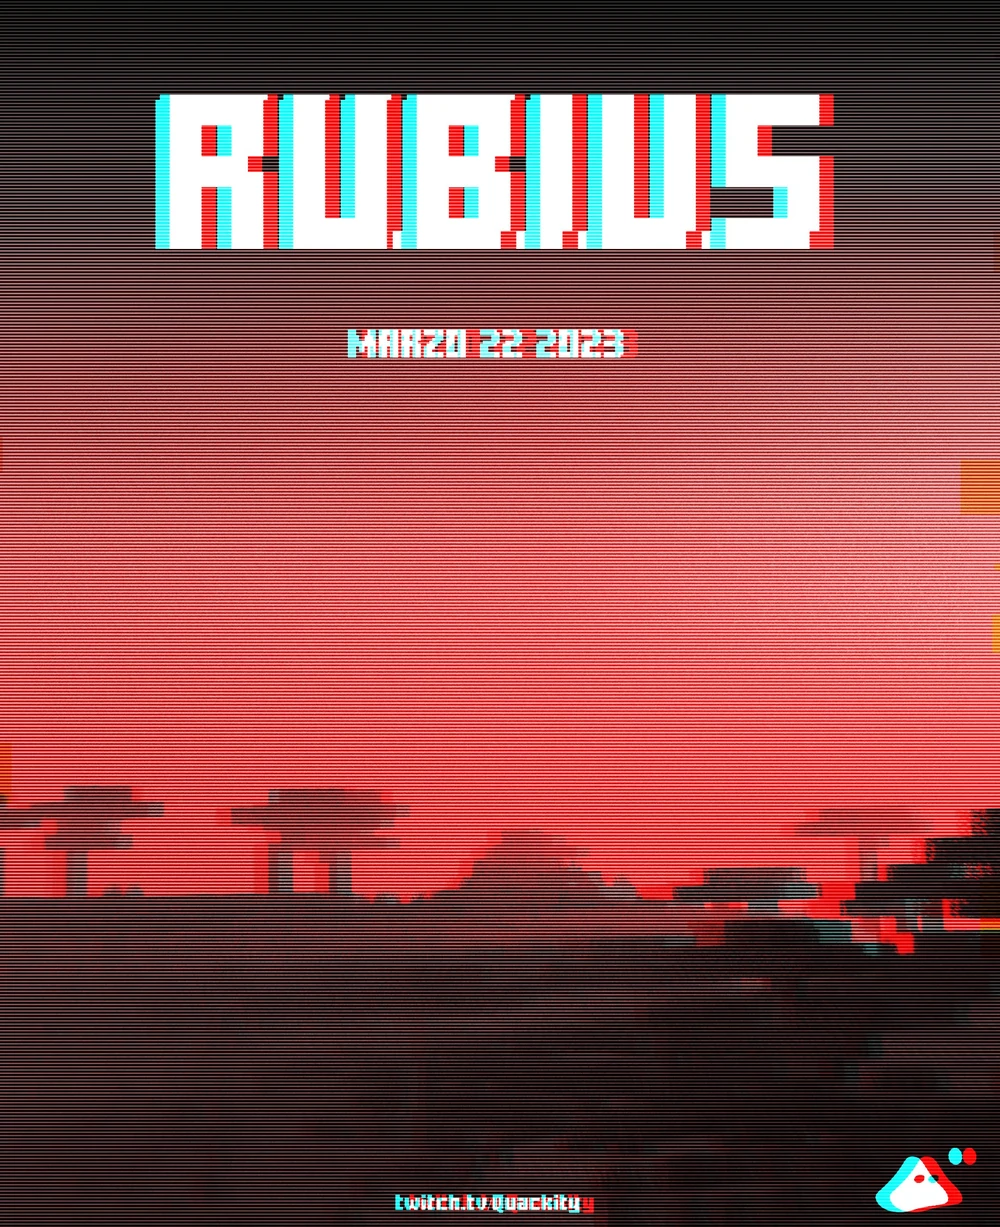 Official announcement poster for Rubius. The poster is not very clear as it looks glitched or like the printer misaligned the colors when printing. The sky is red and the land is black in shadow in the background. As far as the view can tell, there is no one in the poster.